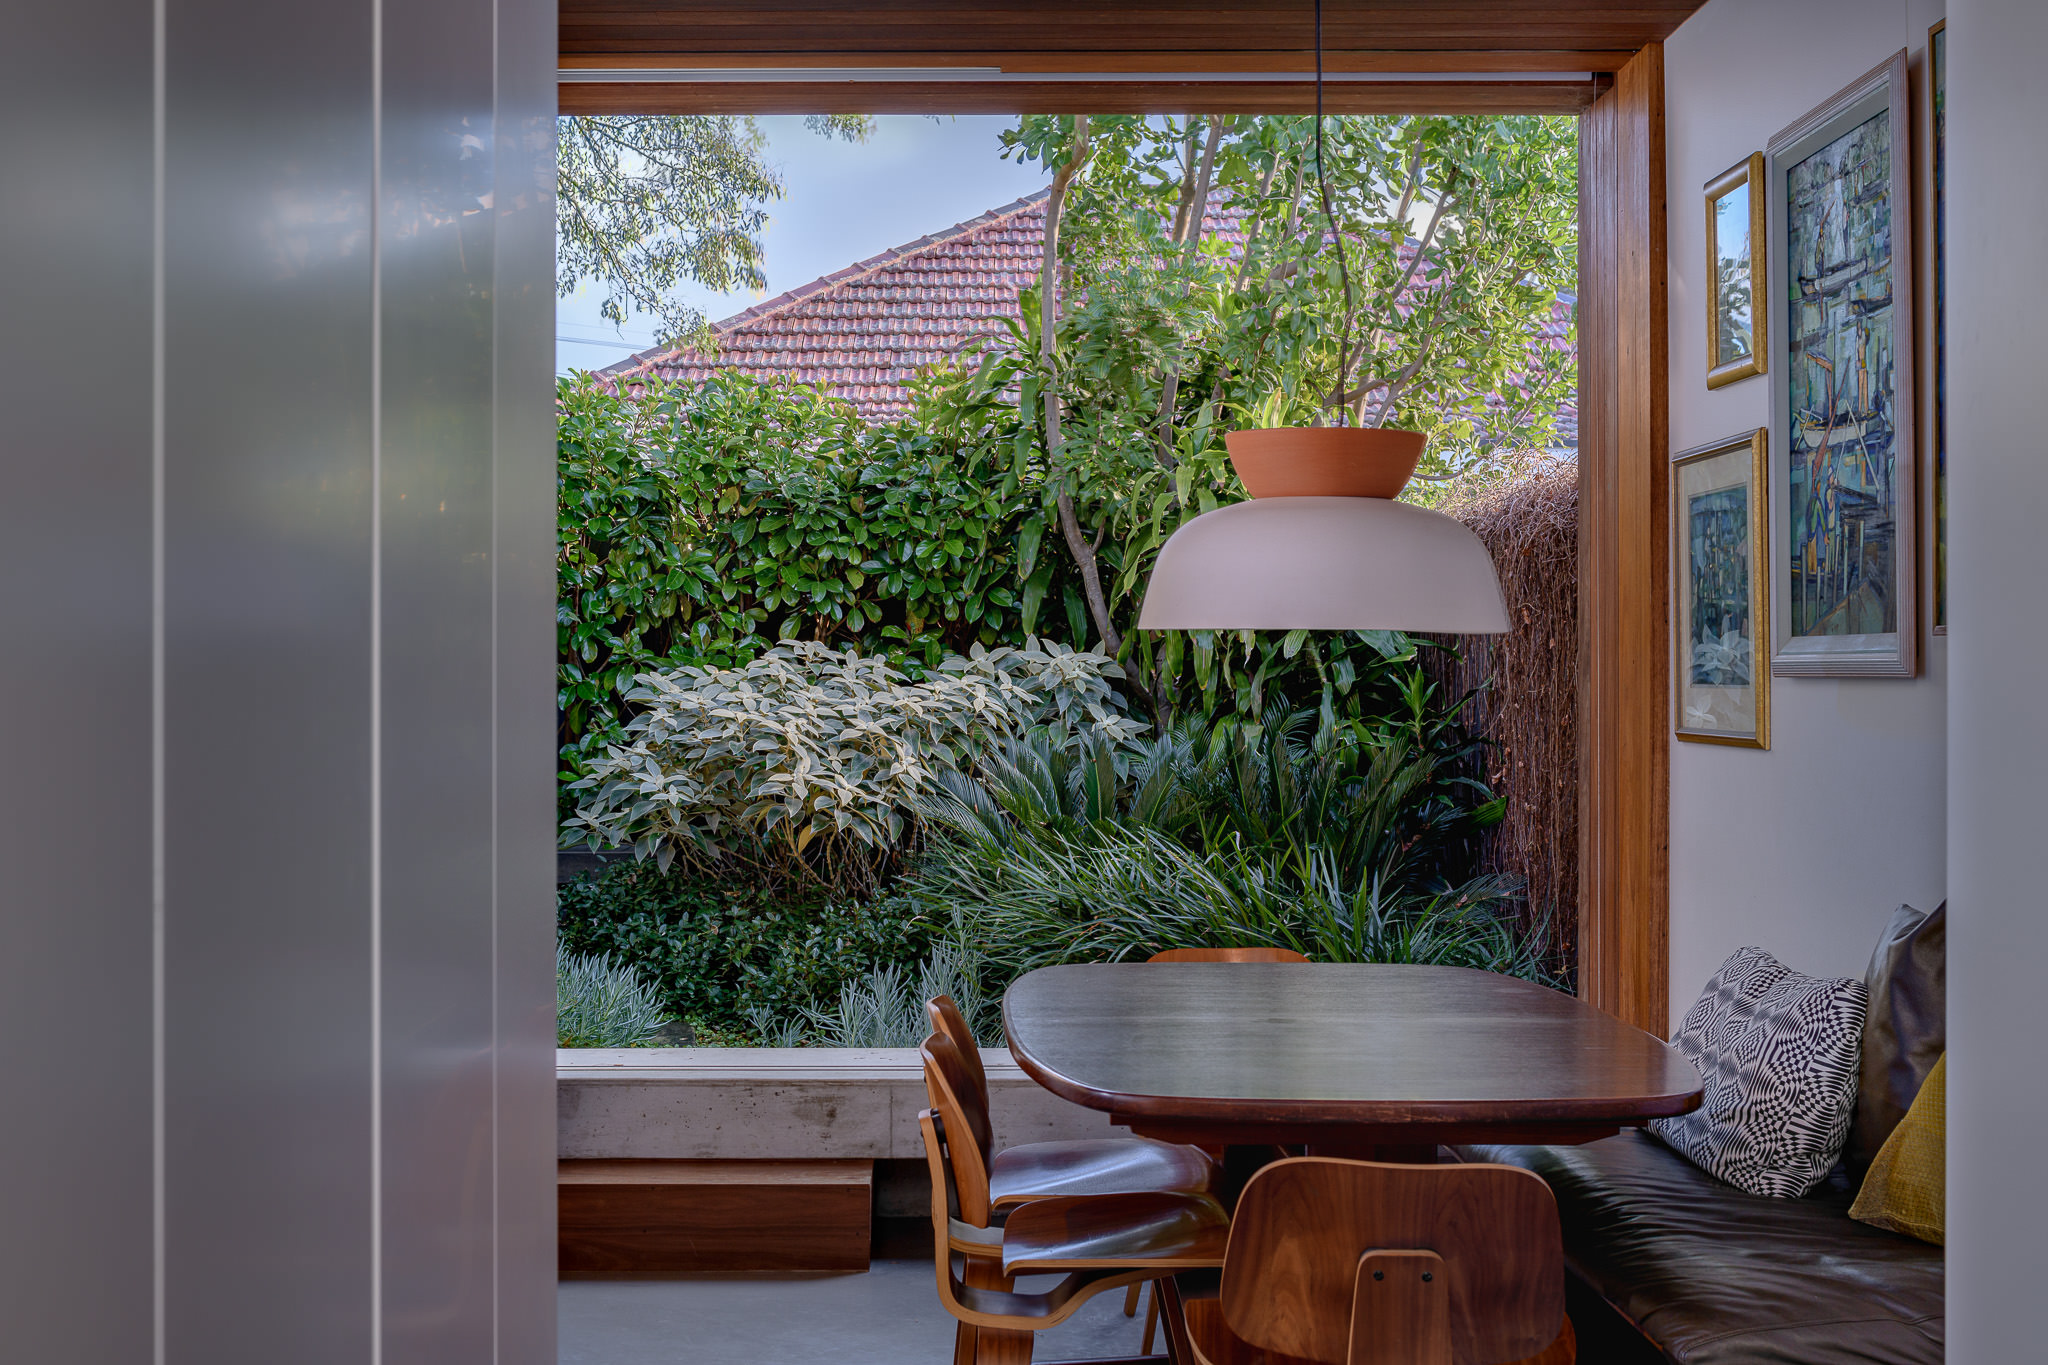 Tawa Garden House, by Potter & Wilson